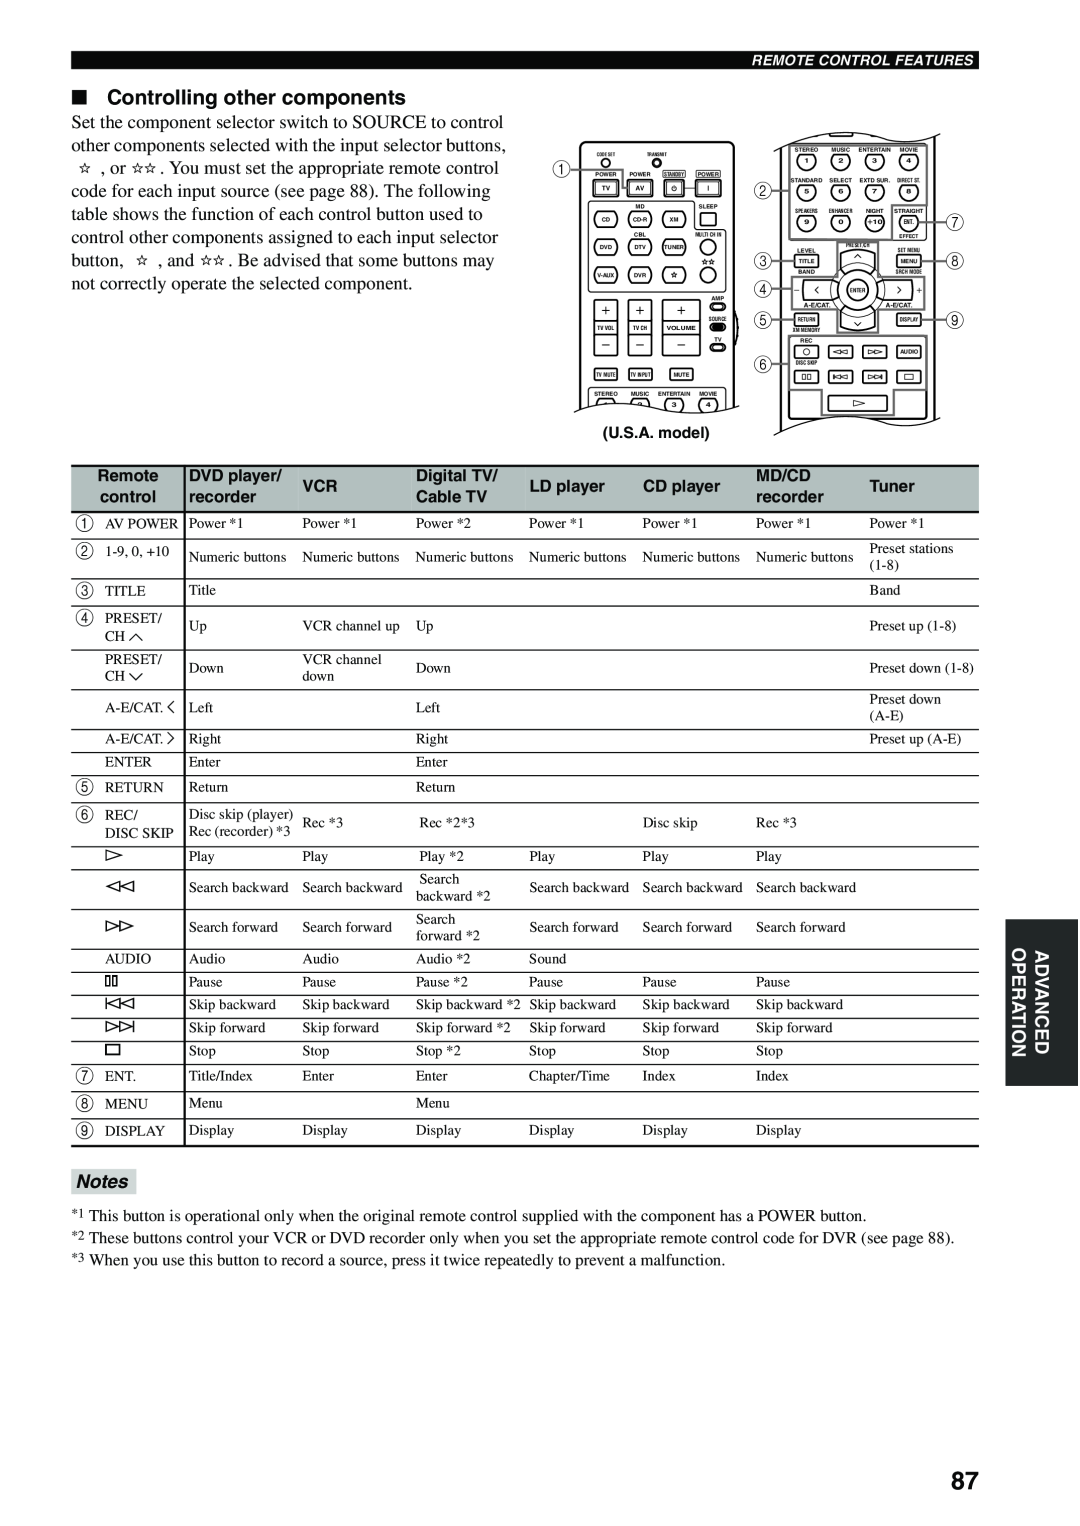 Yamaha HTR-5940 owner manual Controlling other components, Notes 